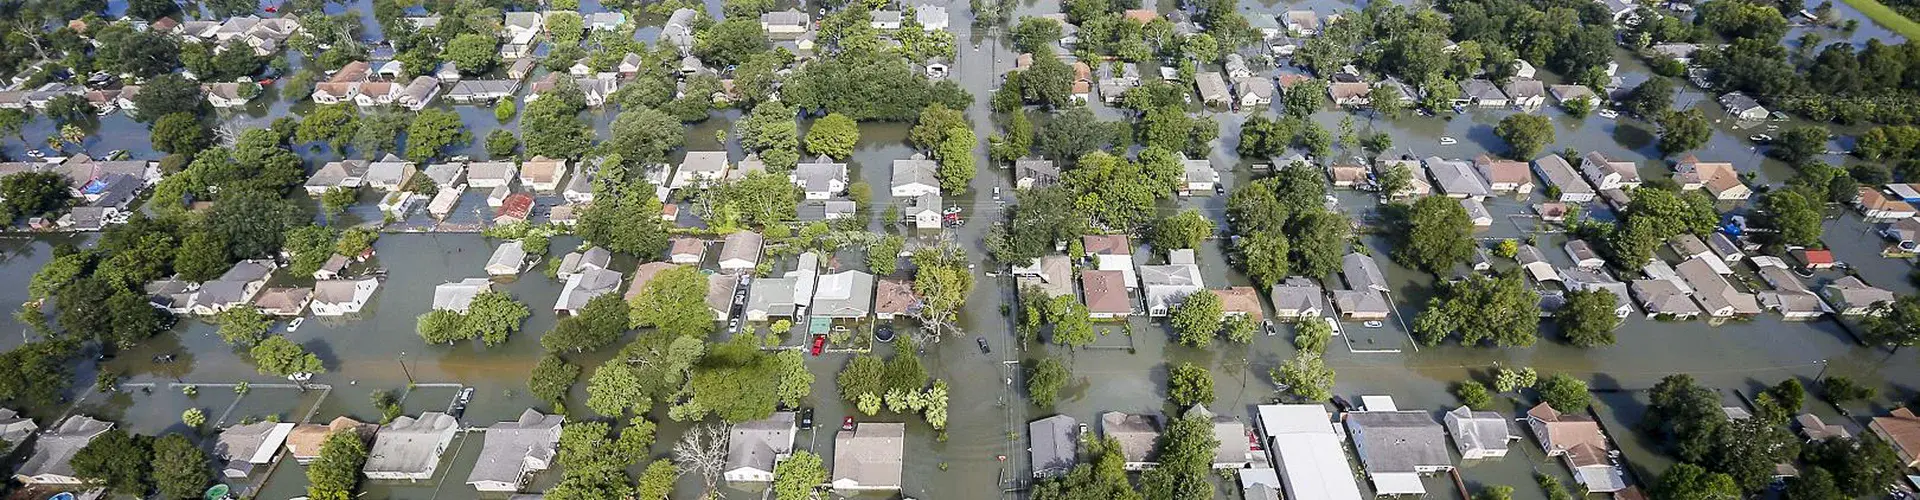 Aerial view showing flooding from Harvey in a residential area in Southeast Texas, Aug. 31, 2017 (Credit: Air National Guard photo by Staff Sgt. Daniel J. Martinez)